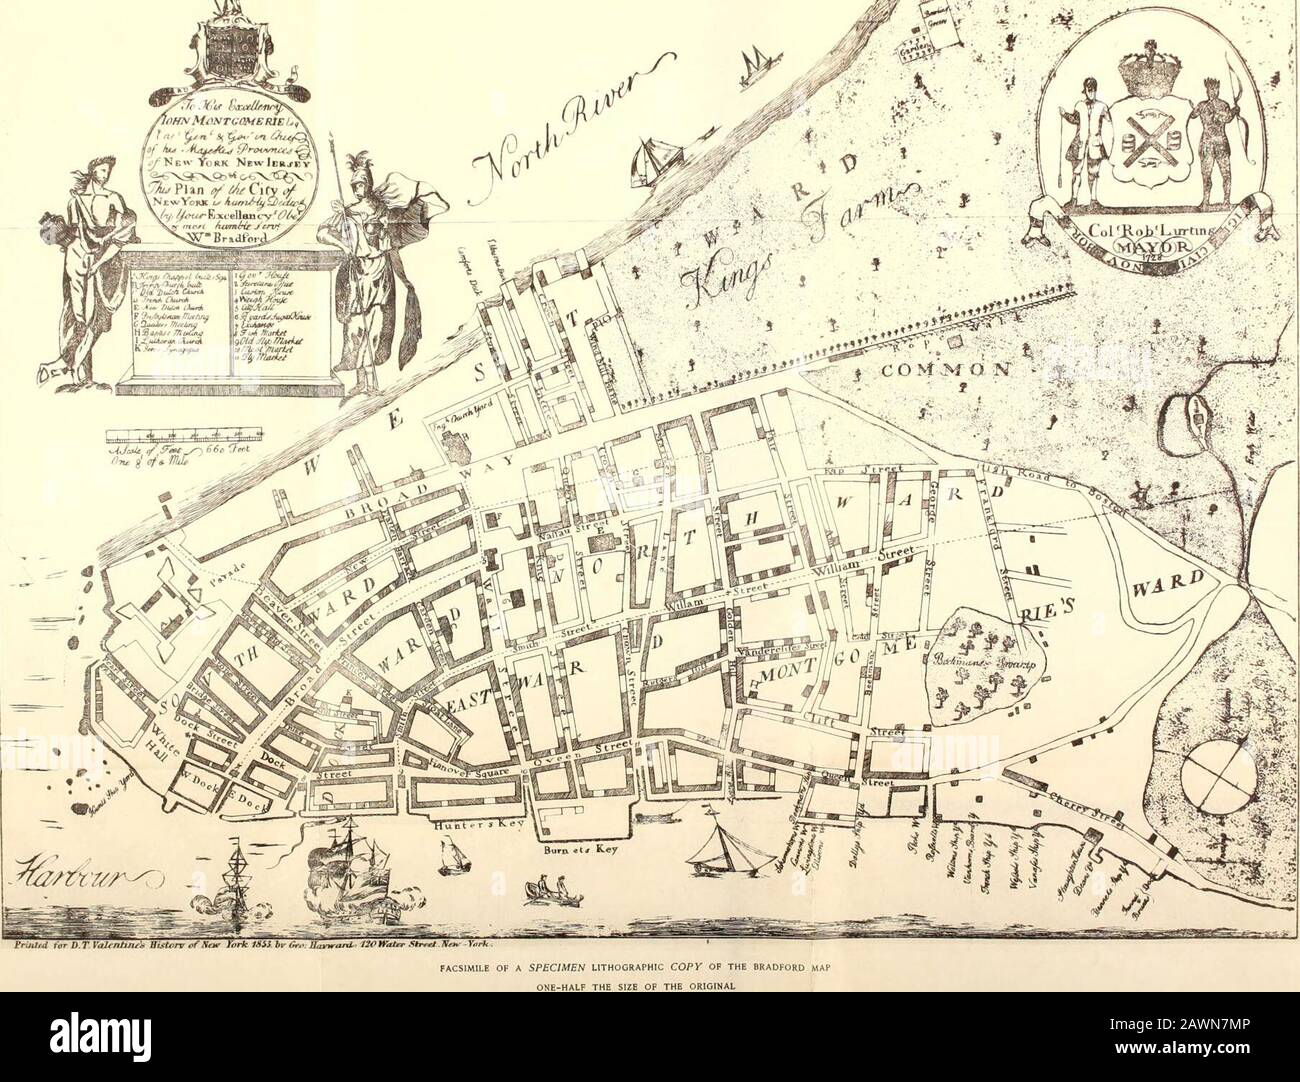 James Lyne S Survey Or As It Is More Commonly Known The Bradford Map C Facsimile Of The Bradford Mapone Half The Size Of The Original James Lynes Survey Or As It Is